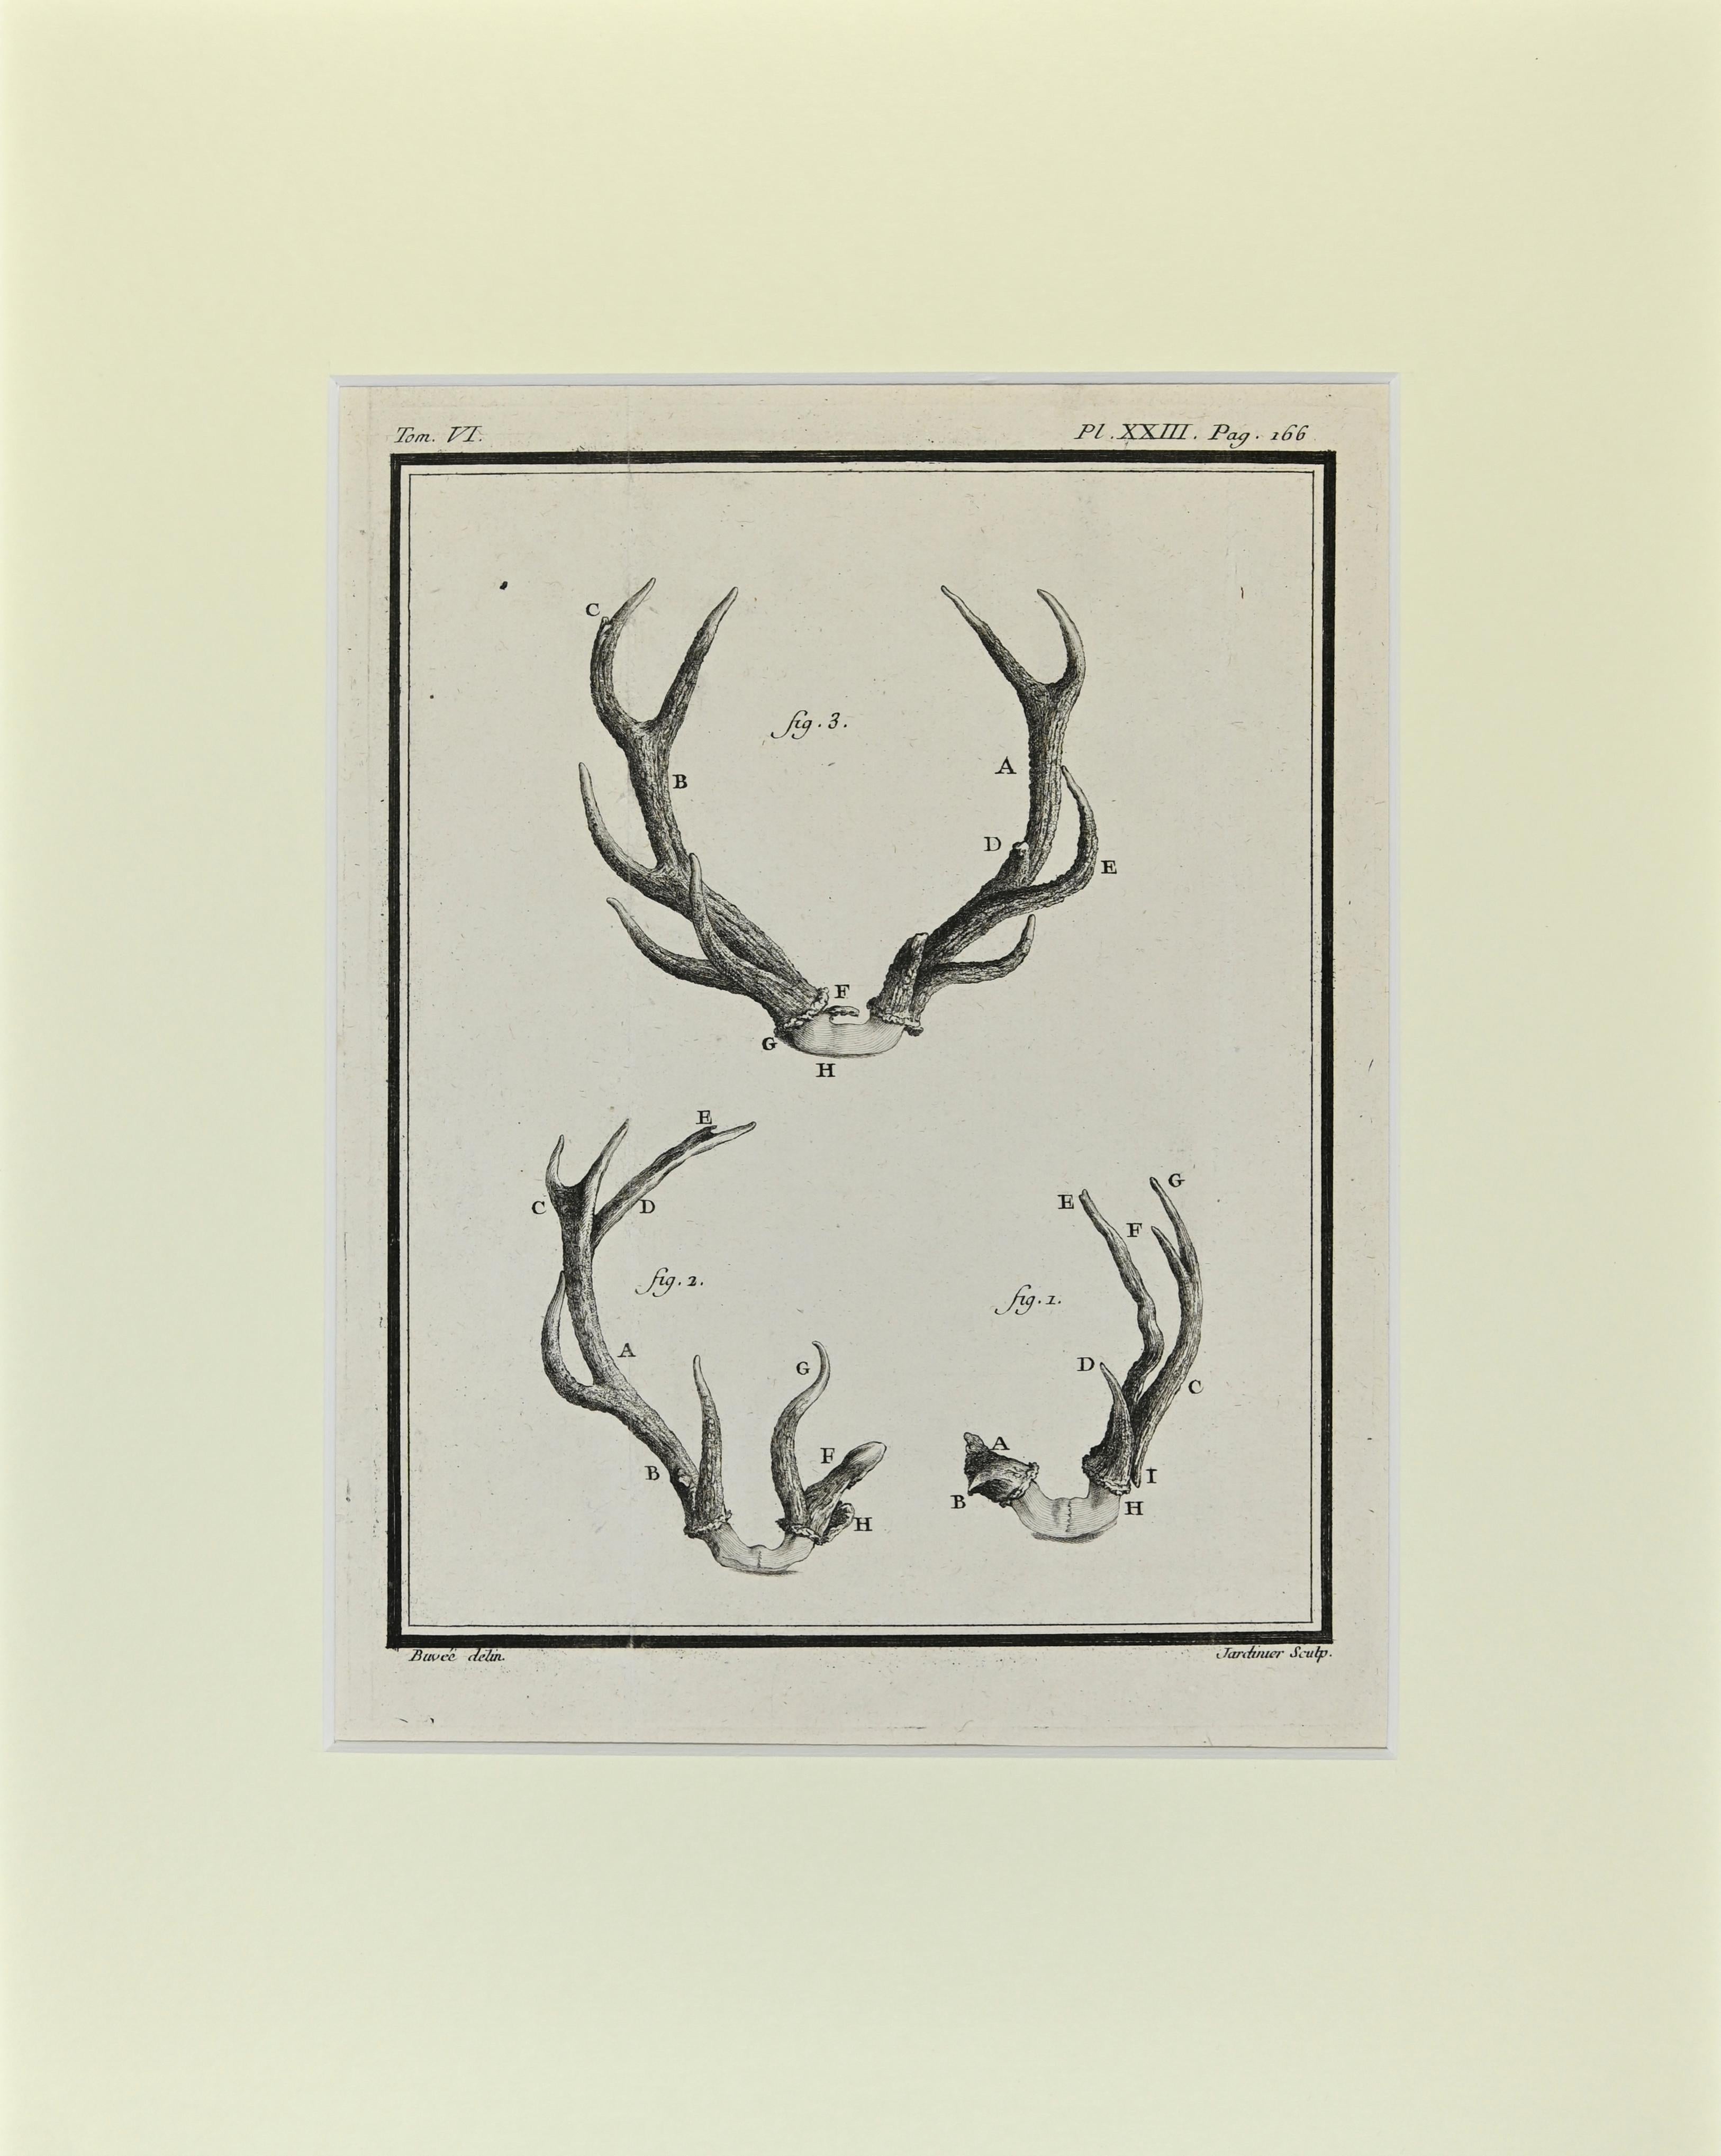 Cornamentas is an artwork realized  by  Buvée l'Américain in 1771.  

Etching B./W. print  on ivory paper. Signed on  plate on the lower left margin.

The work is glued on cardboard. Total dimensions: 35x28 cm.

The artwork belongs to the suite